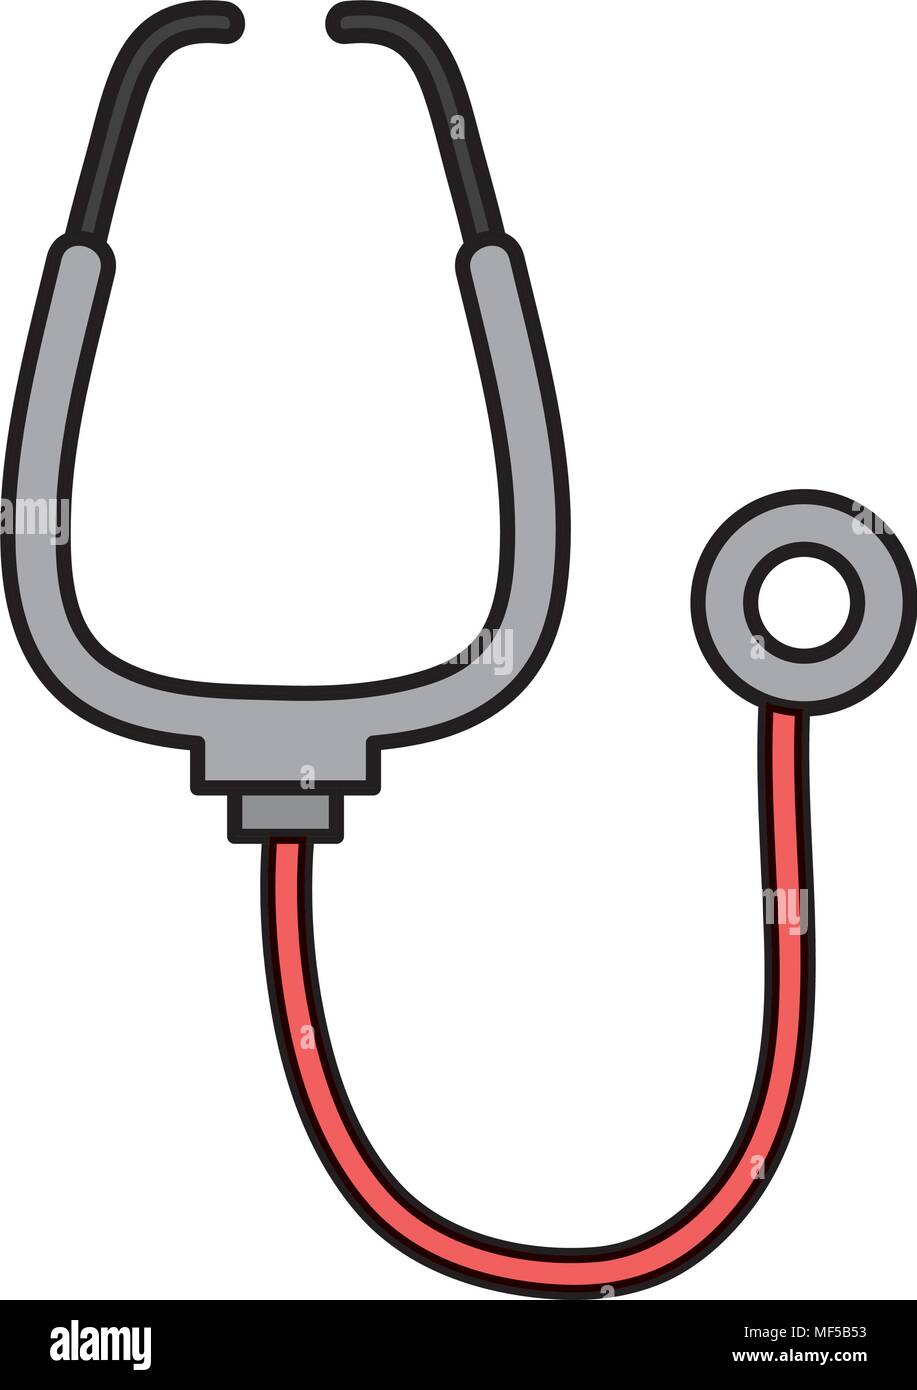 color medical stethoscope tool to rhythm care vector illustration Stock Vector